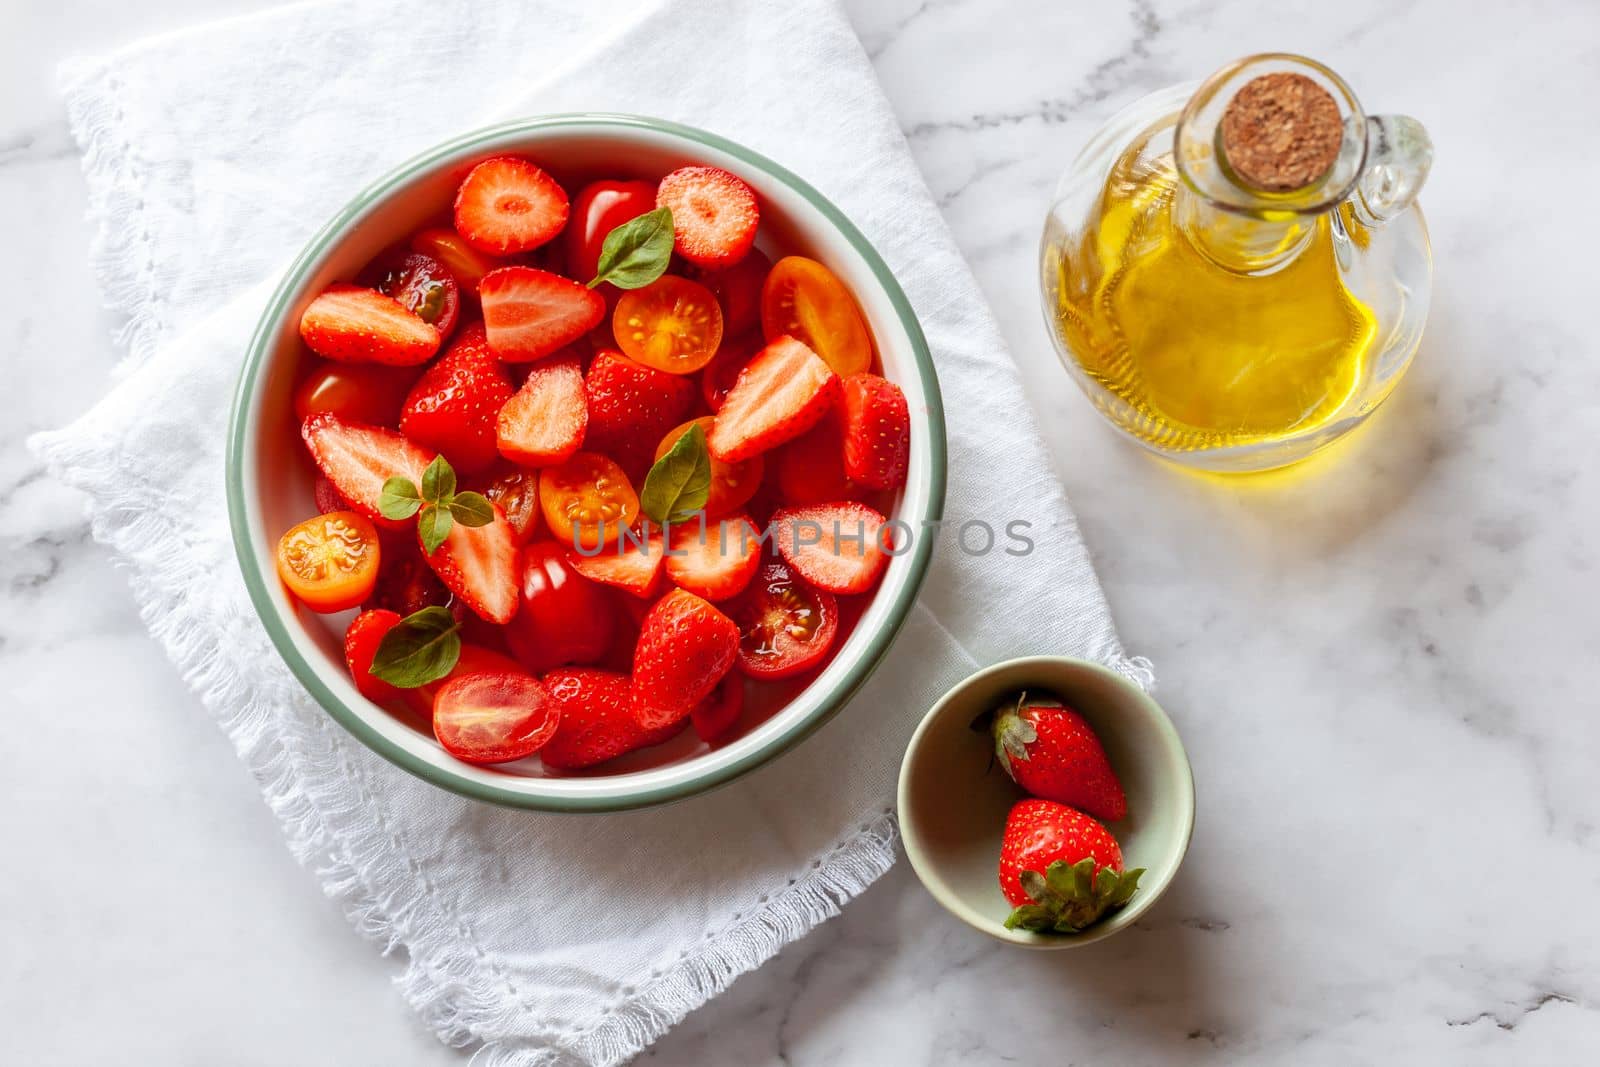 Portion of strawberry and tomato cherry salad decorated with basil leaves by lanych